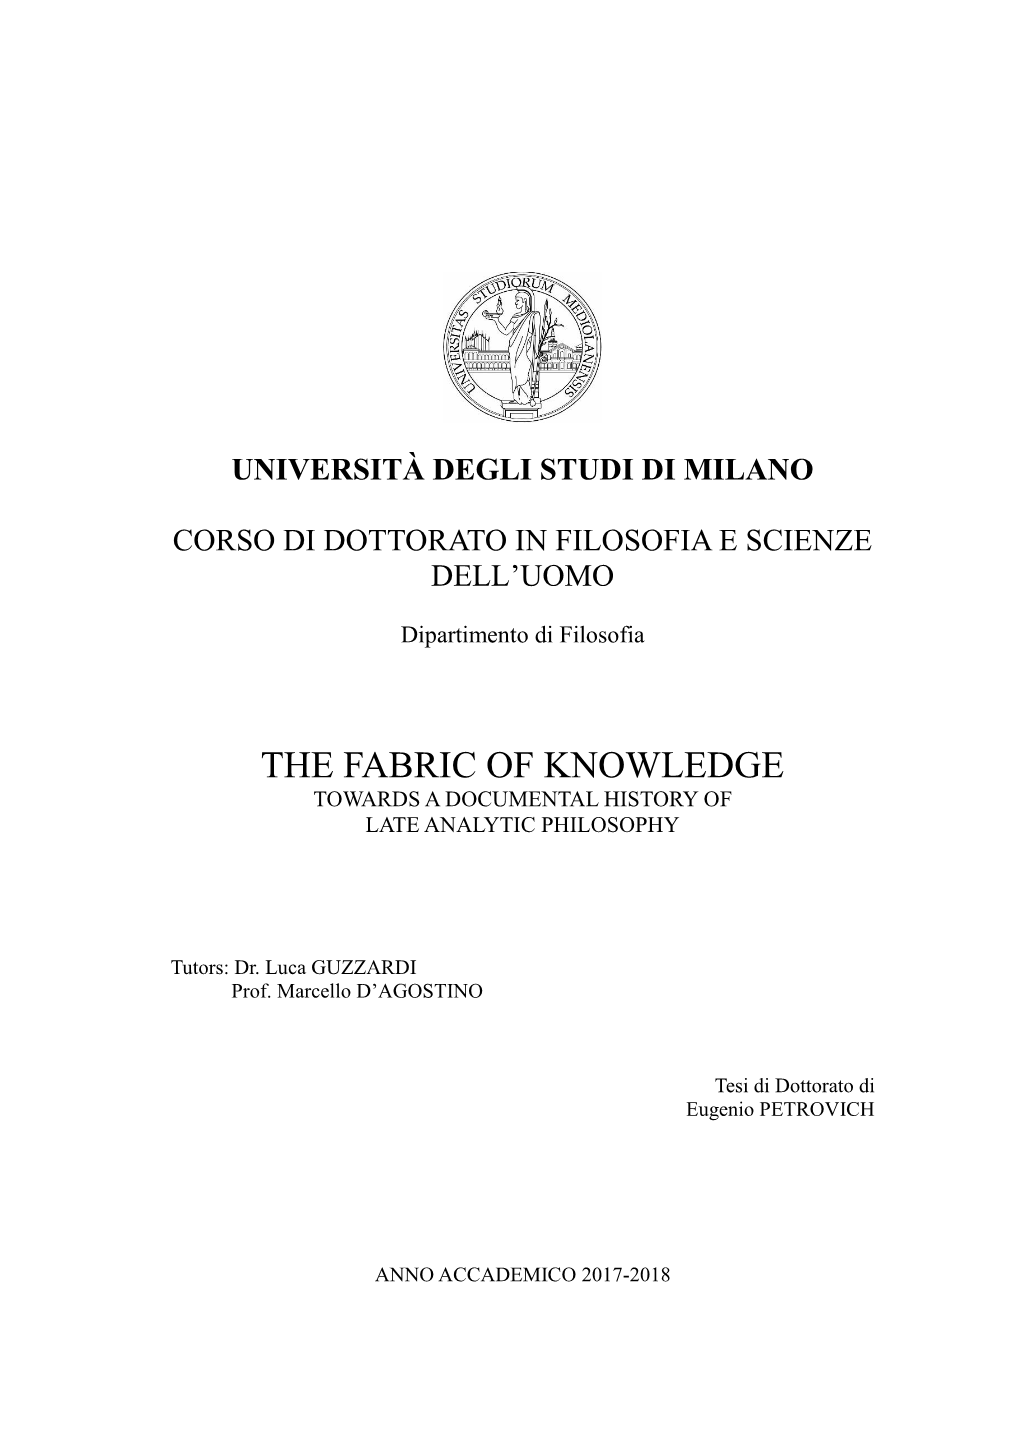 The Fabric of Knowledge Towards a Documental History of Late Analytic Philosophy